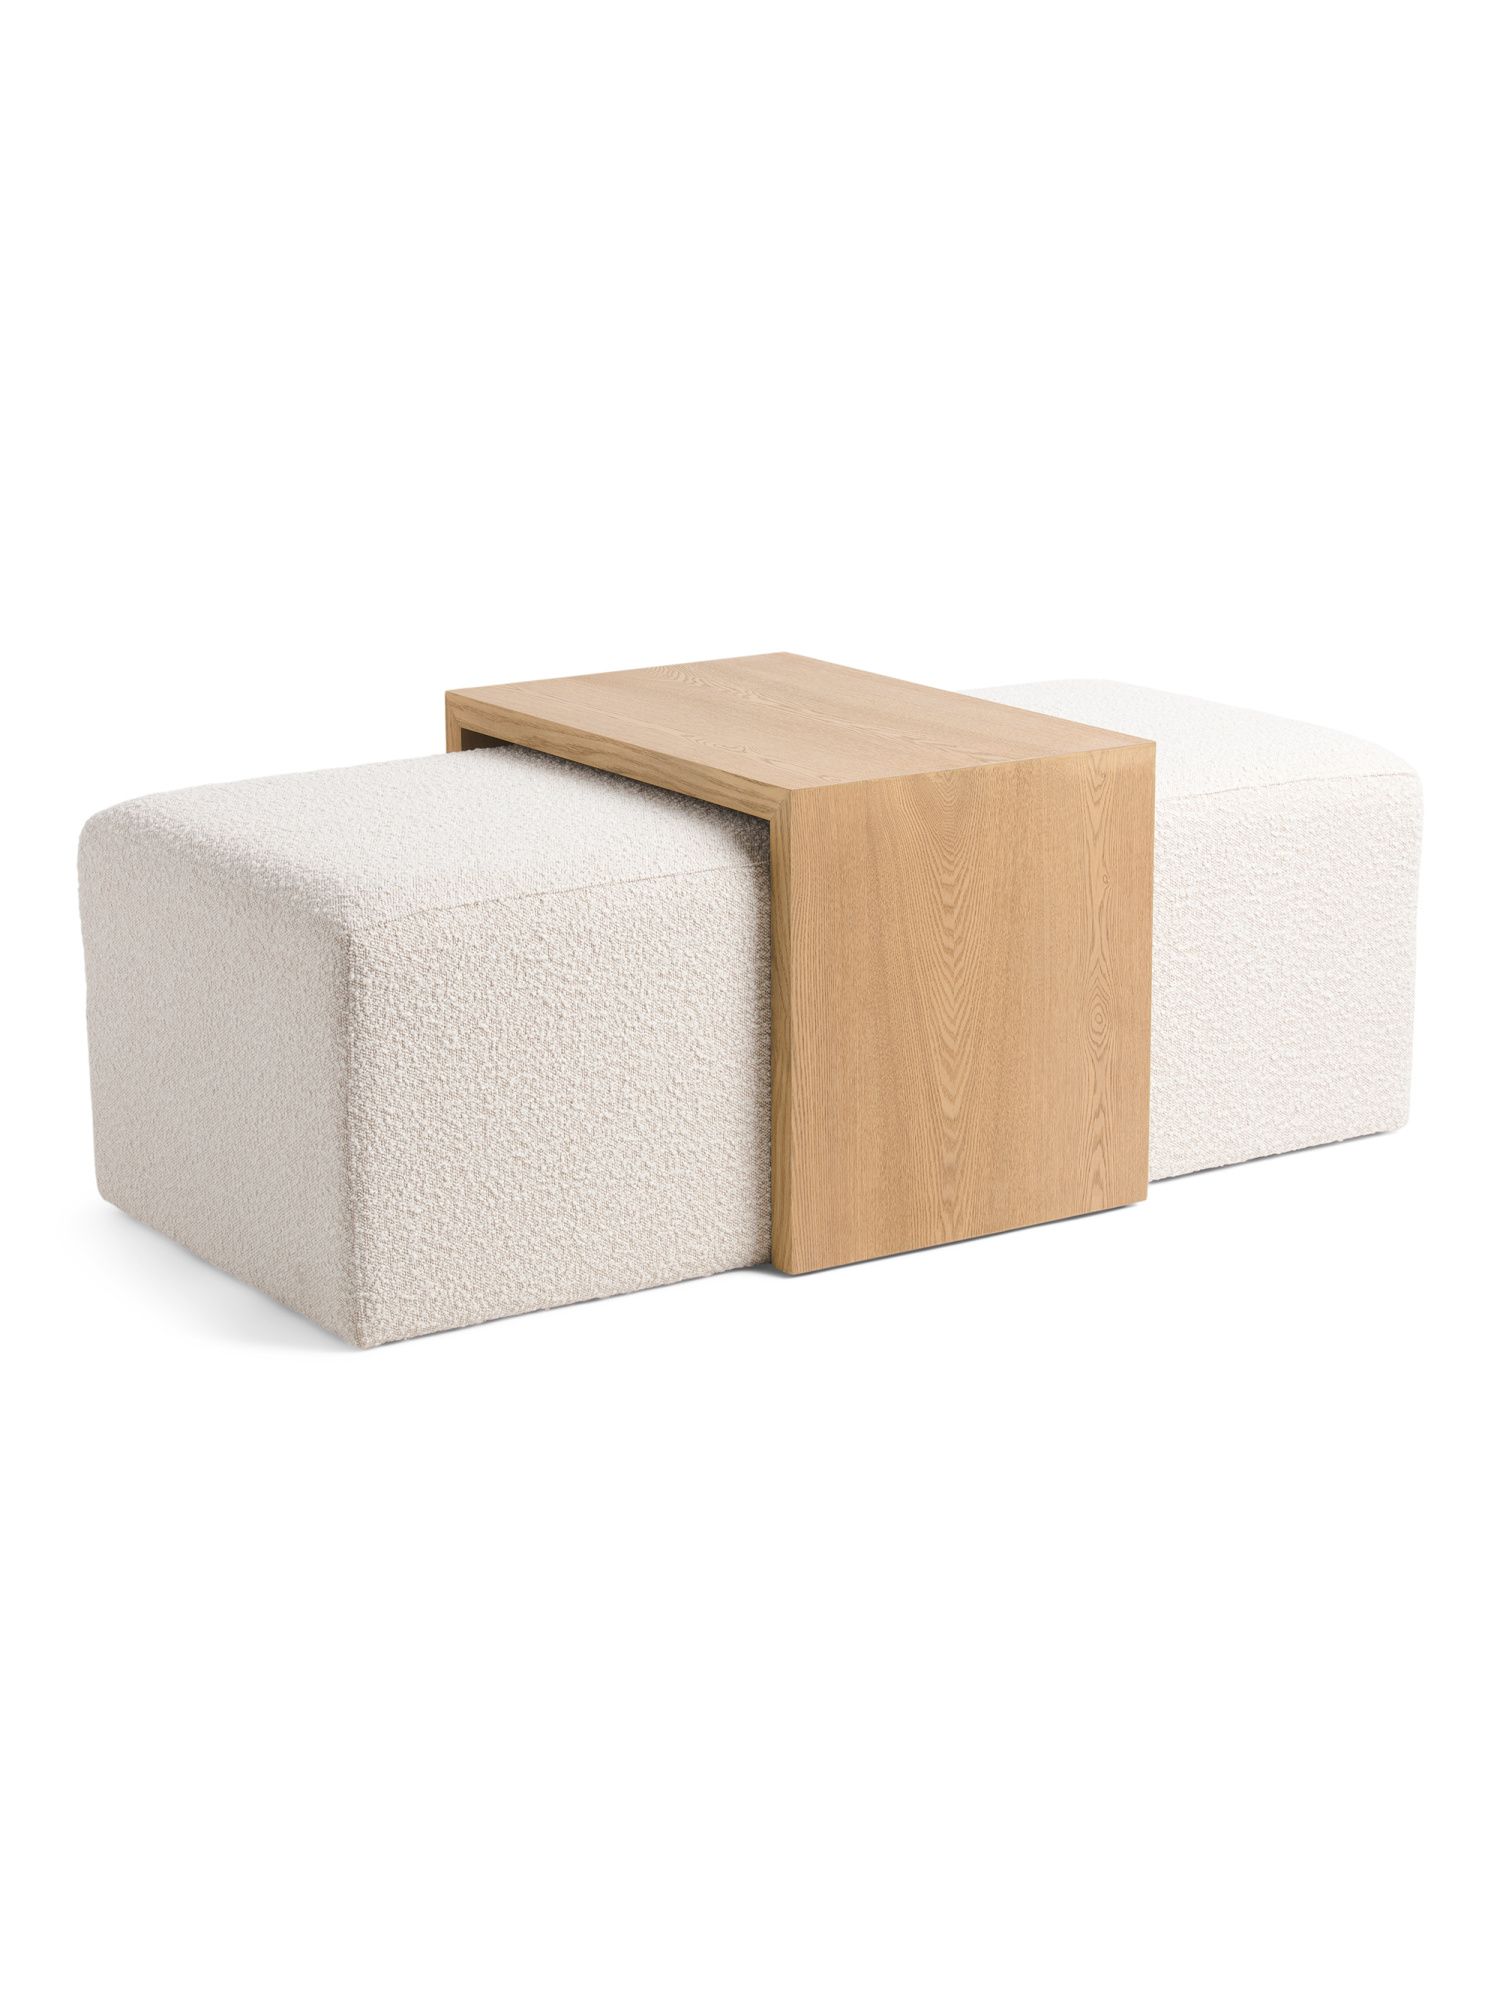 Large Modern Ottoman With Wood Accent | TJ Maxx